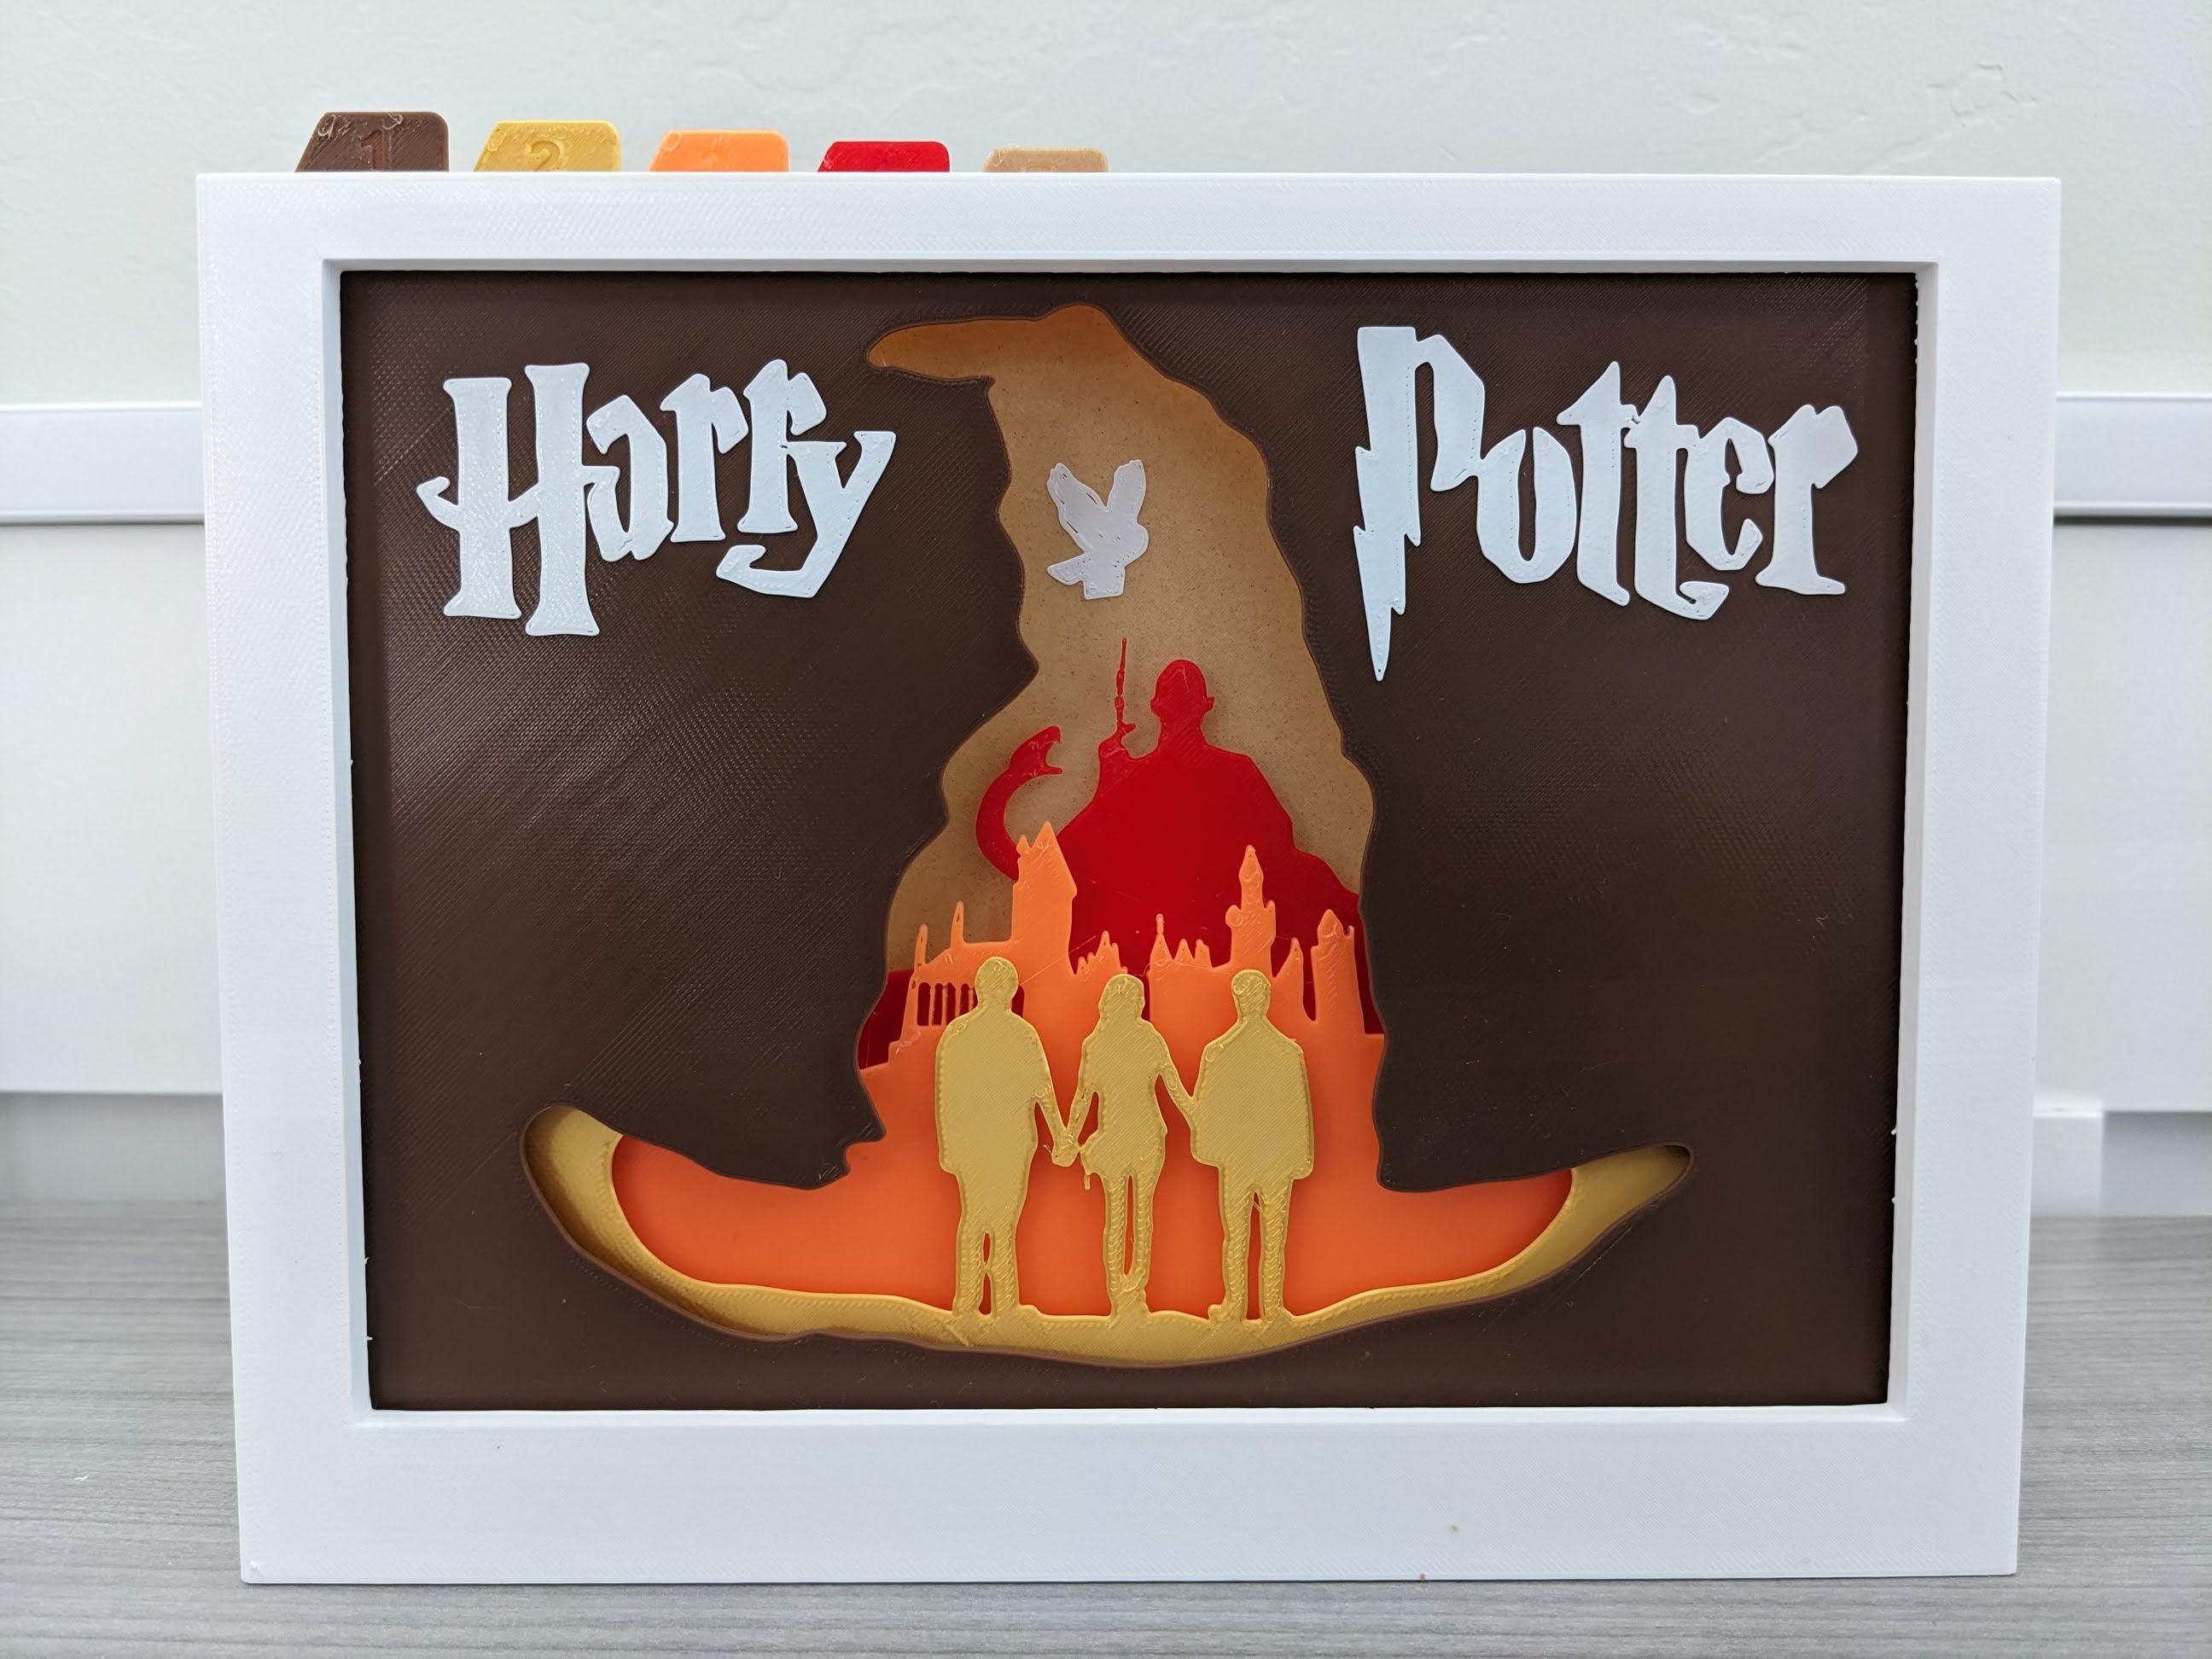 Harry Potter Shadow Box (A) - I combined the 5/6 plates to combine them together which allowed me to use this in the 5 plate display.

Made with:
monoprice white pla
sunlu silk gold pla
monoprice orange pla
overture red pla - 3d model